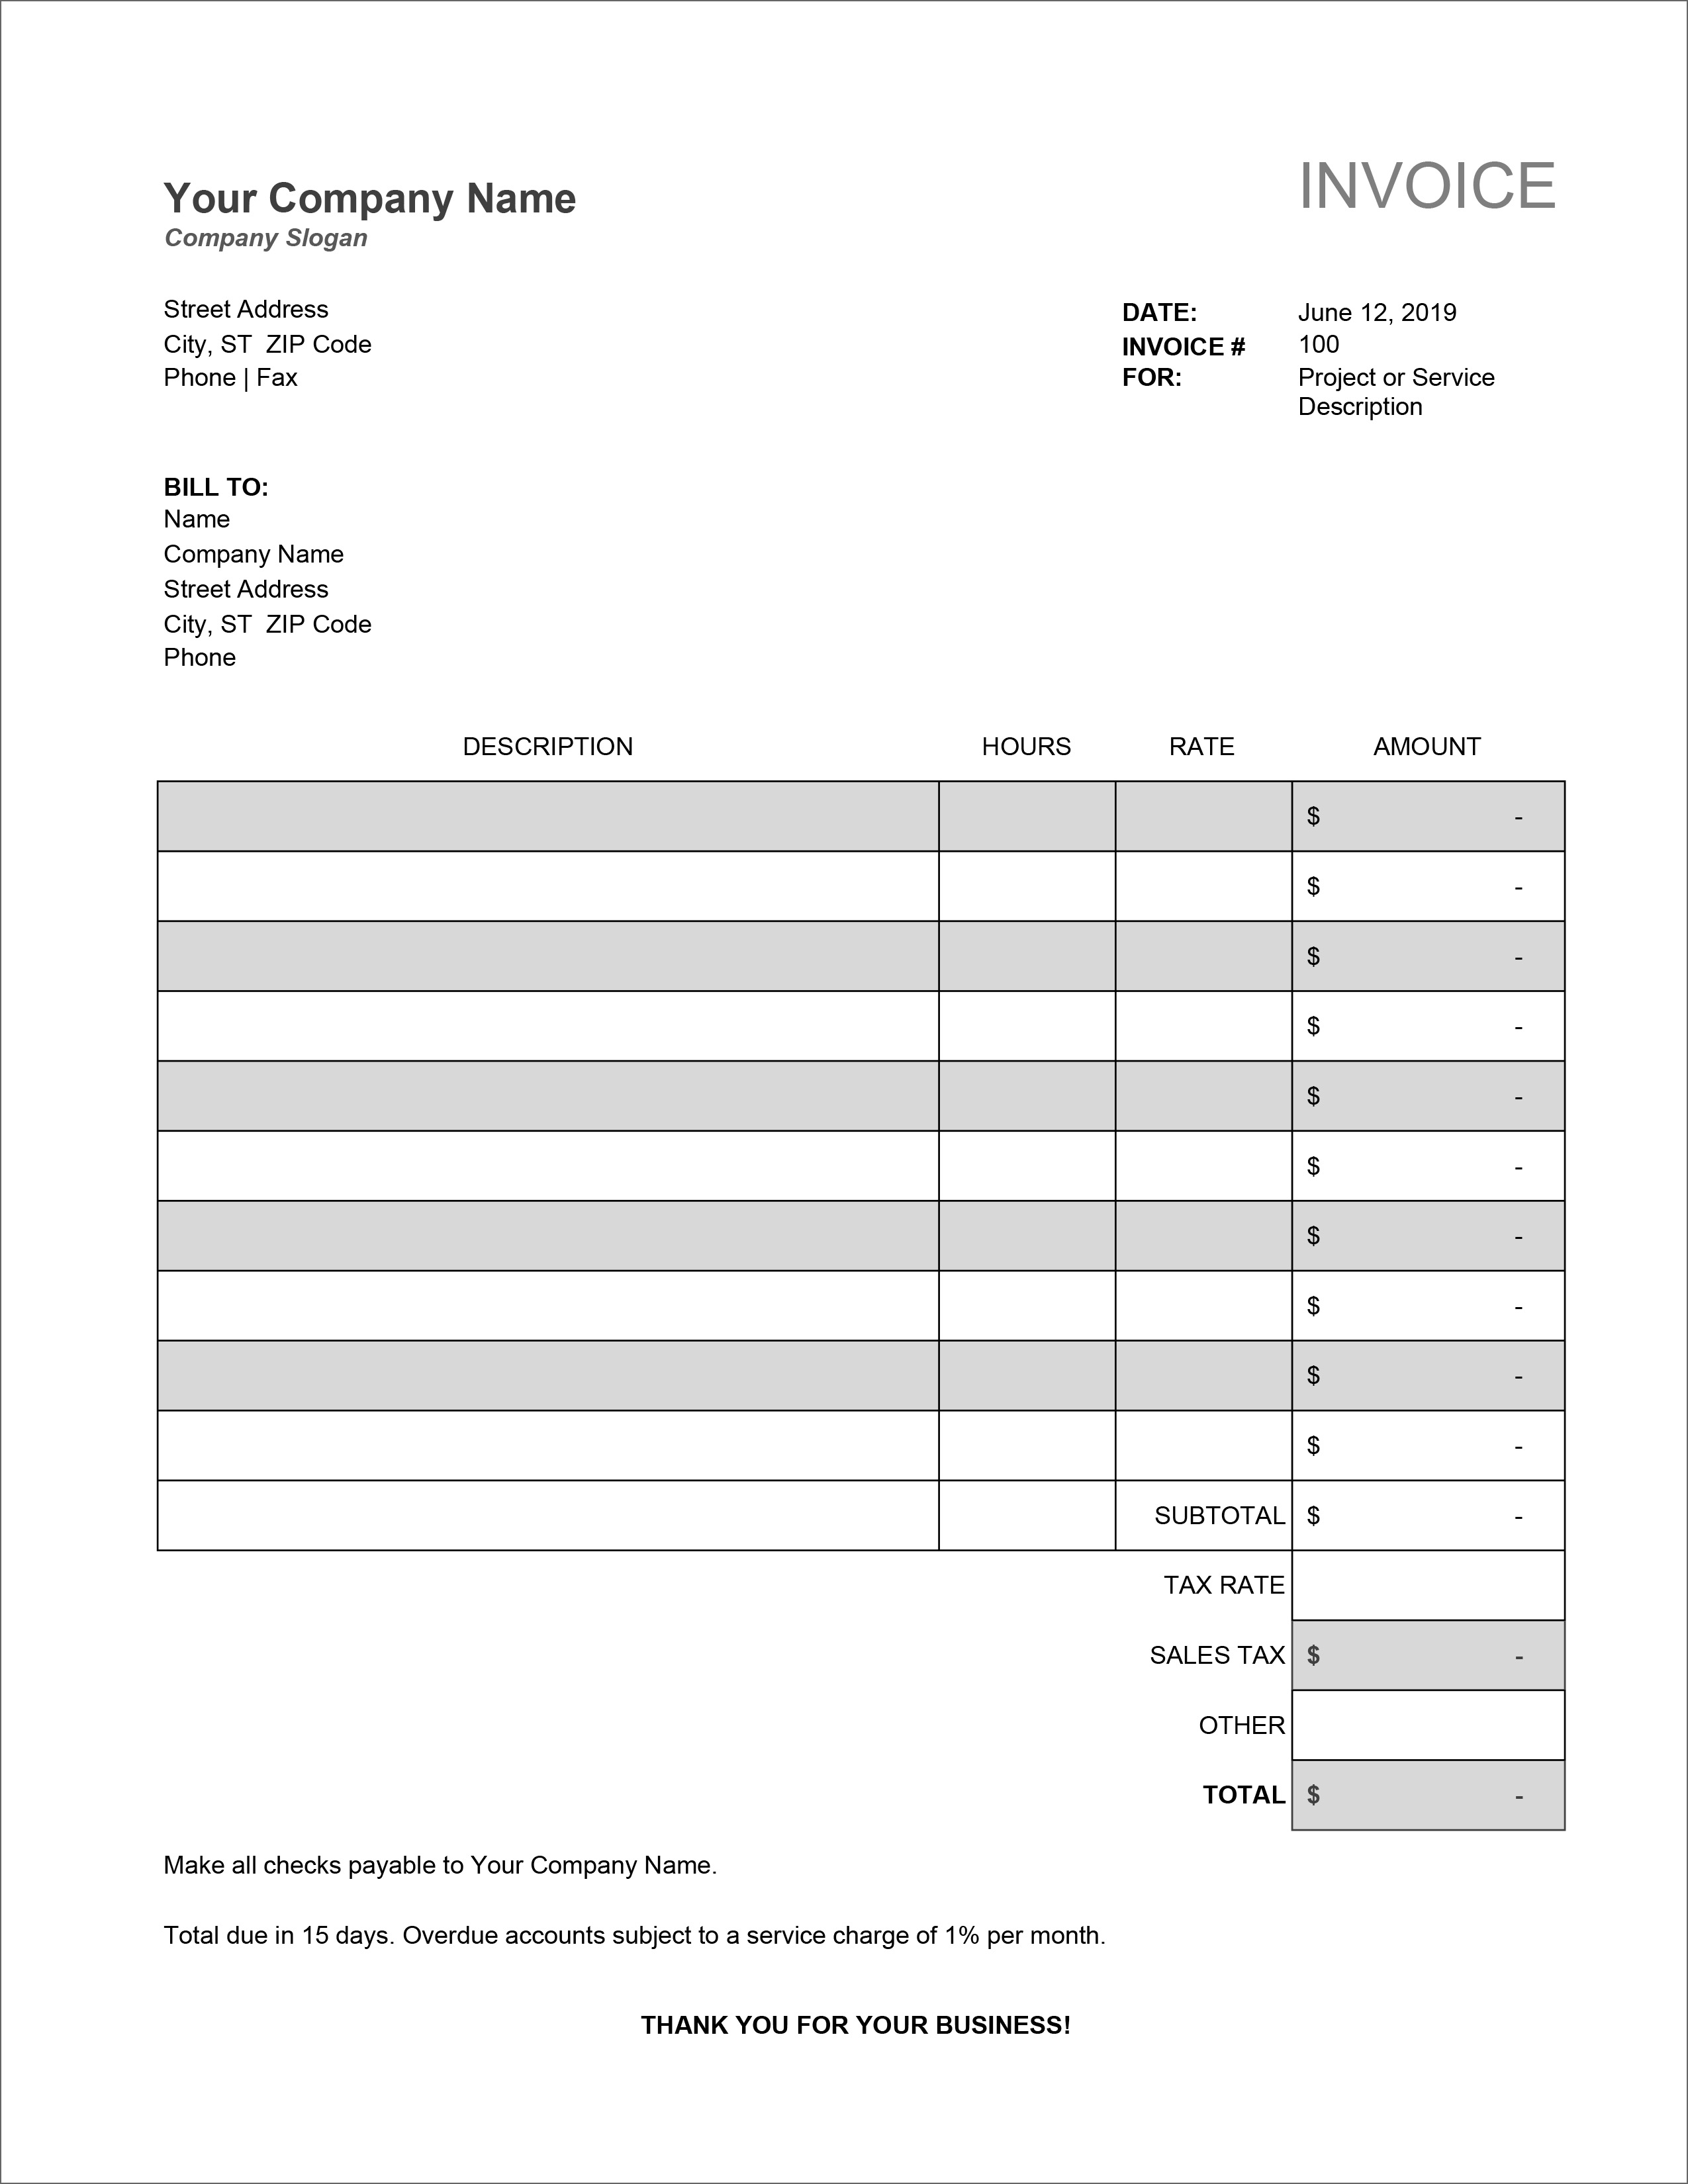 32 Free Invoice Templates In Microsoft Excel And DOCX Formats